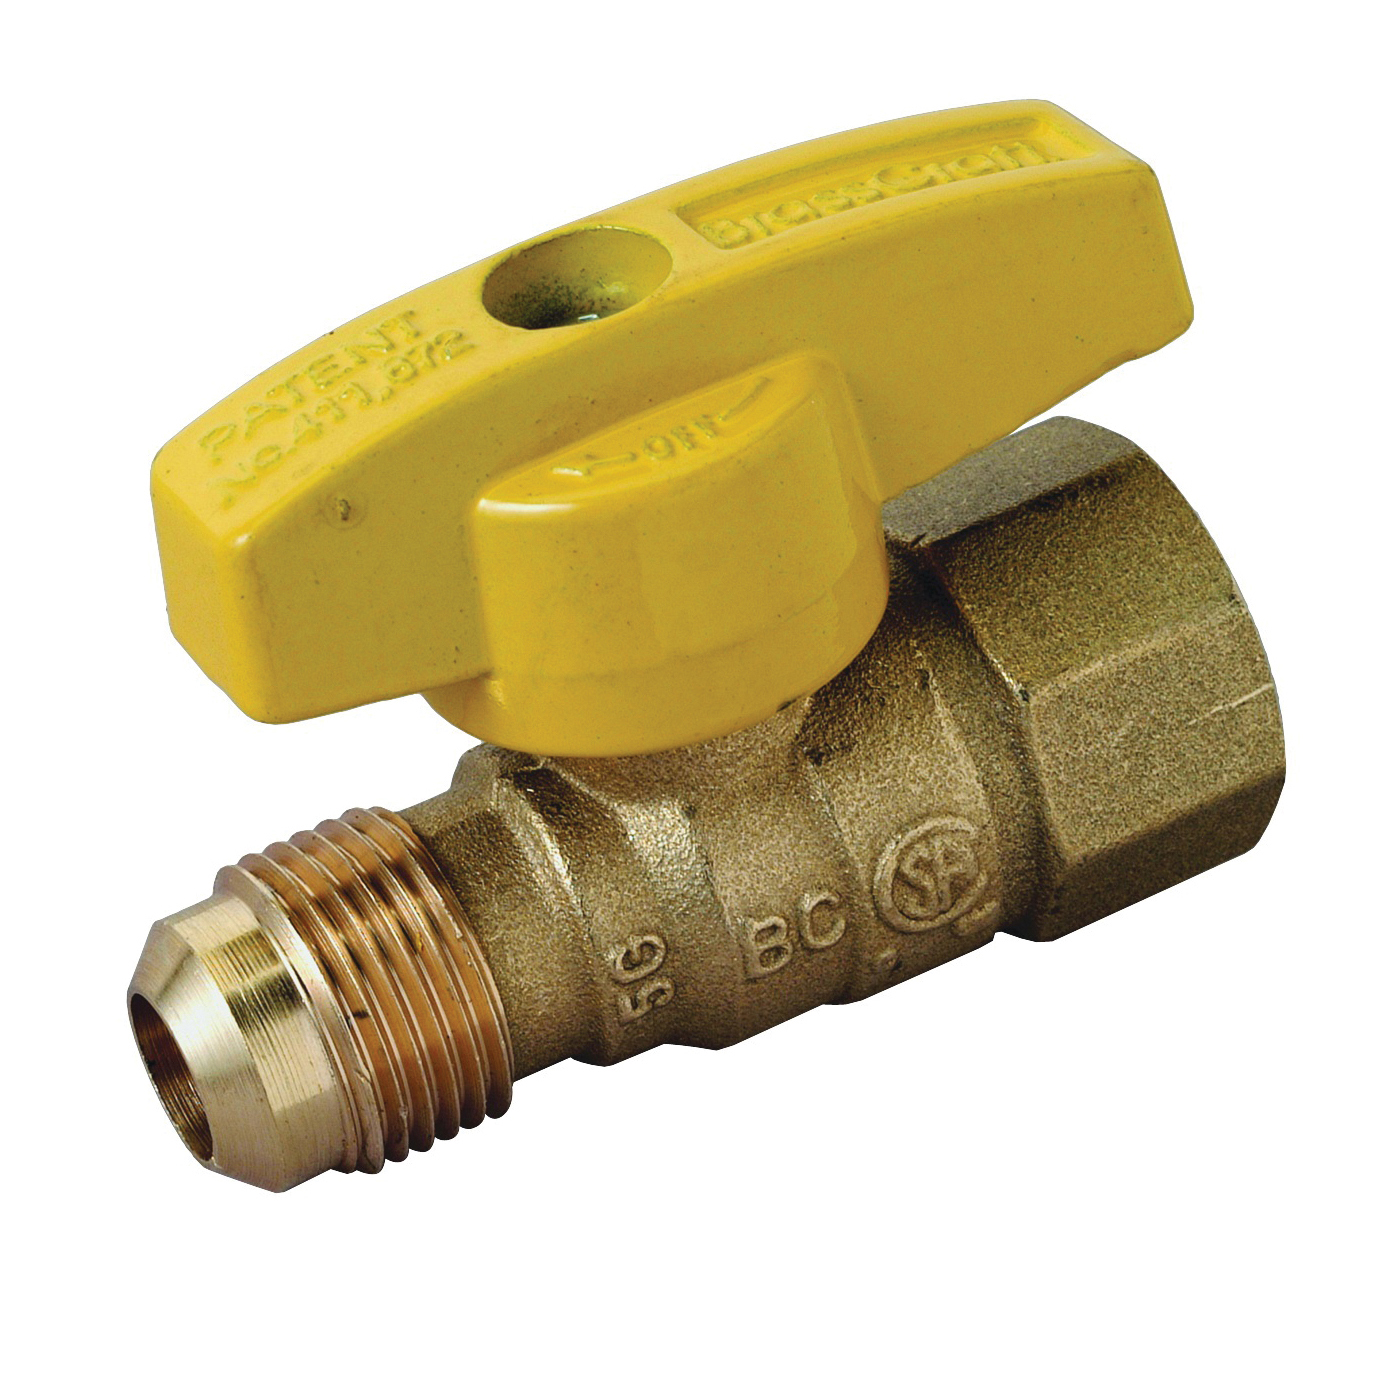 PSSD-41 Gas Ball Valve, 1/2 in Connection, Flared x FIP, 5 psi Pressure, Brass Body